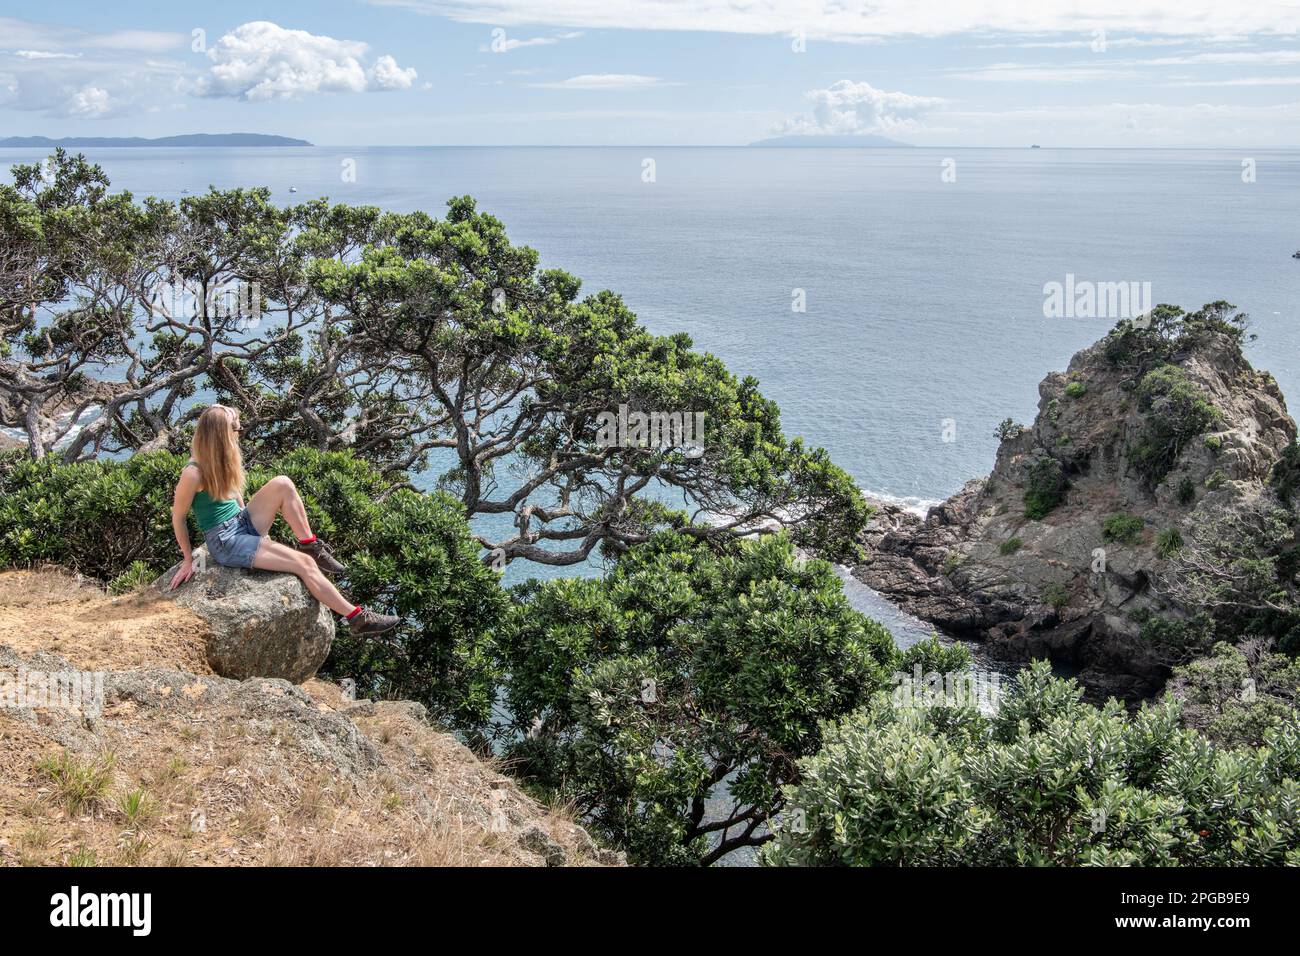 A woman sits on the rocky coast of Tiritiri Matangi island in the Hauraki gulf looking over the pacific ocean with little barrier island visible. Stock Photo